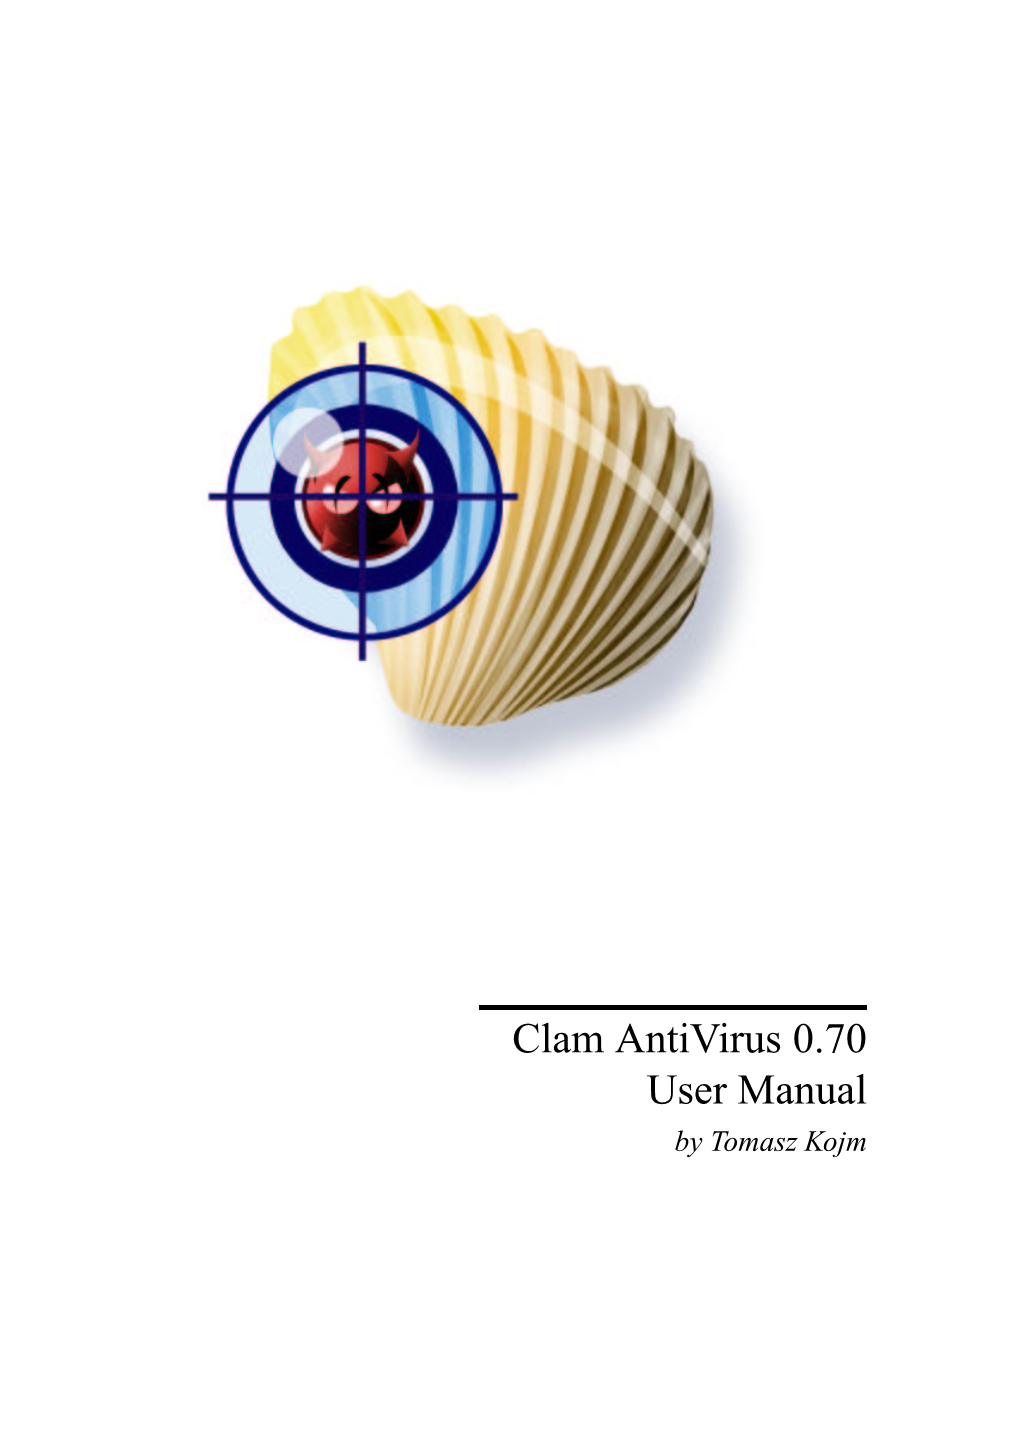 Clam Antivirus 0.70 User Manual by Tomasz Kojm Contents 1